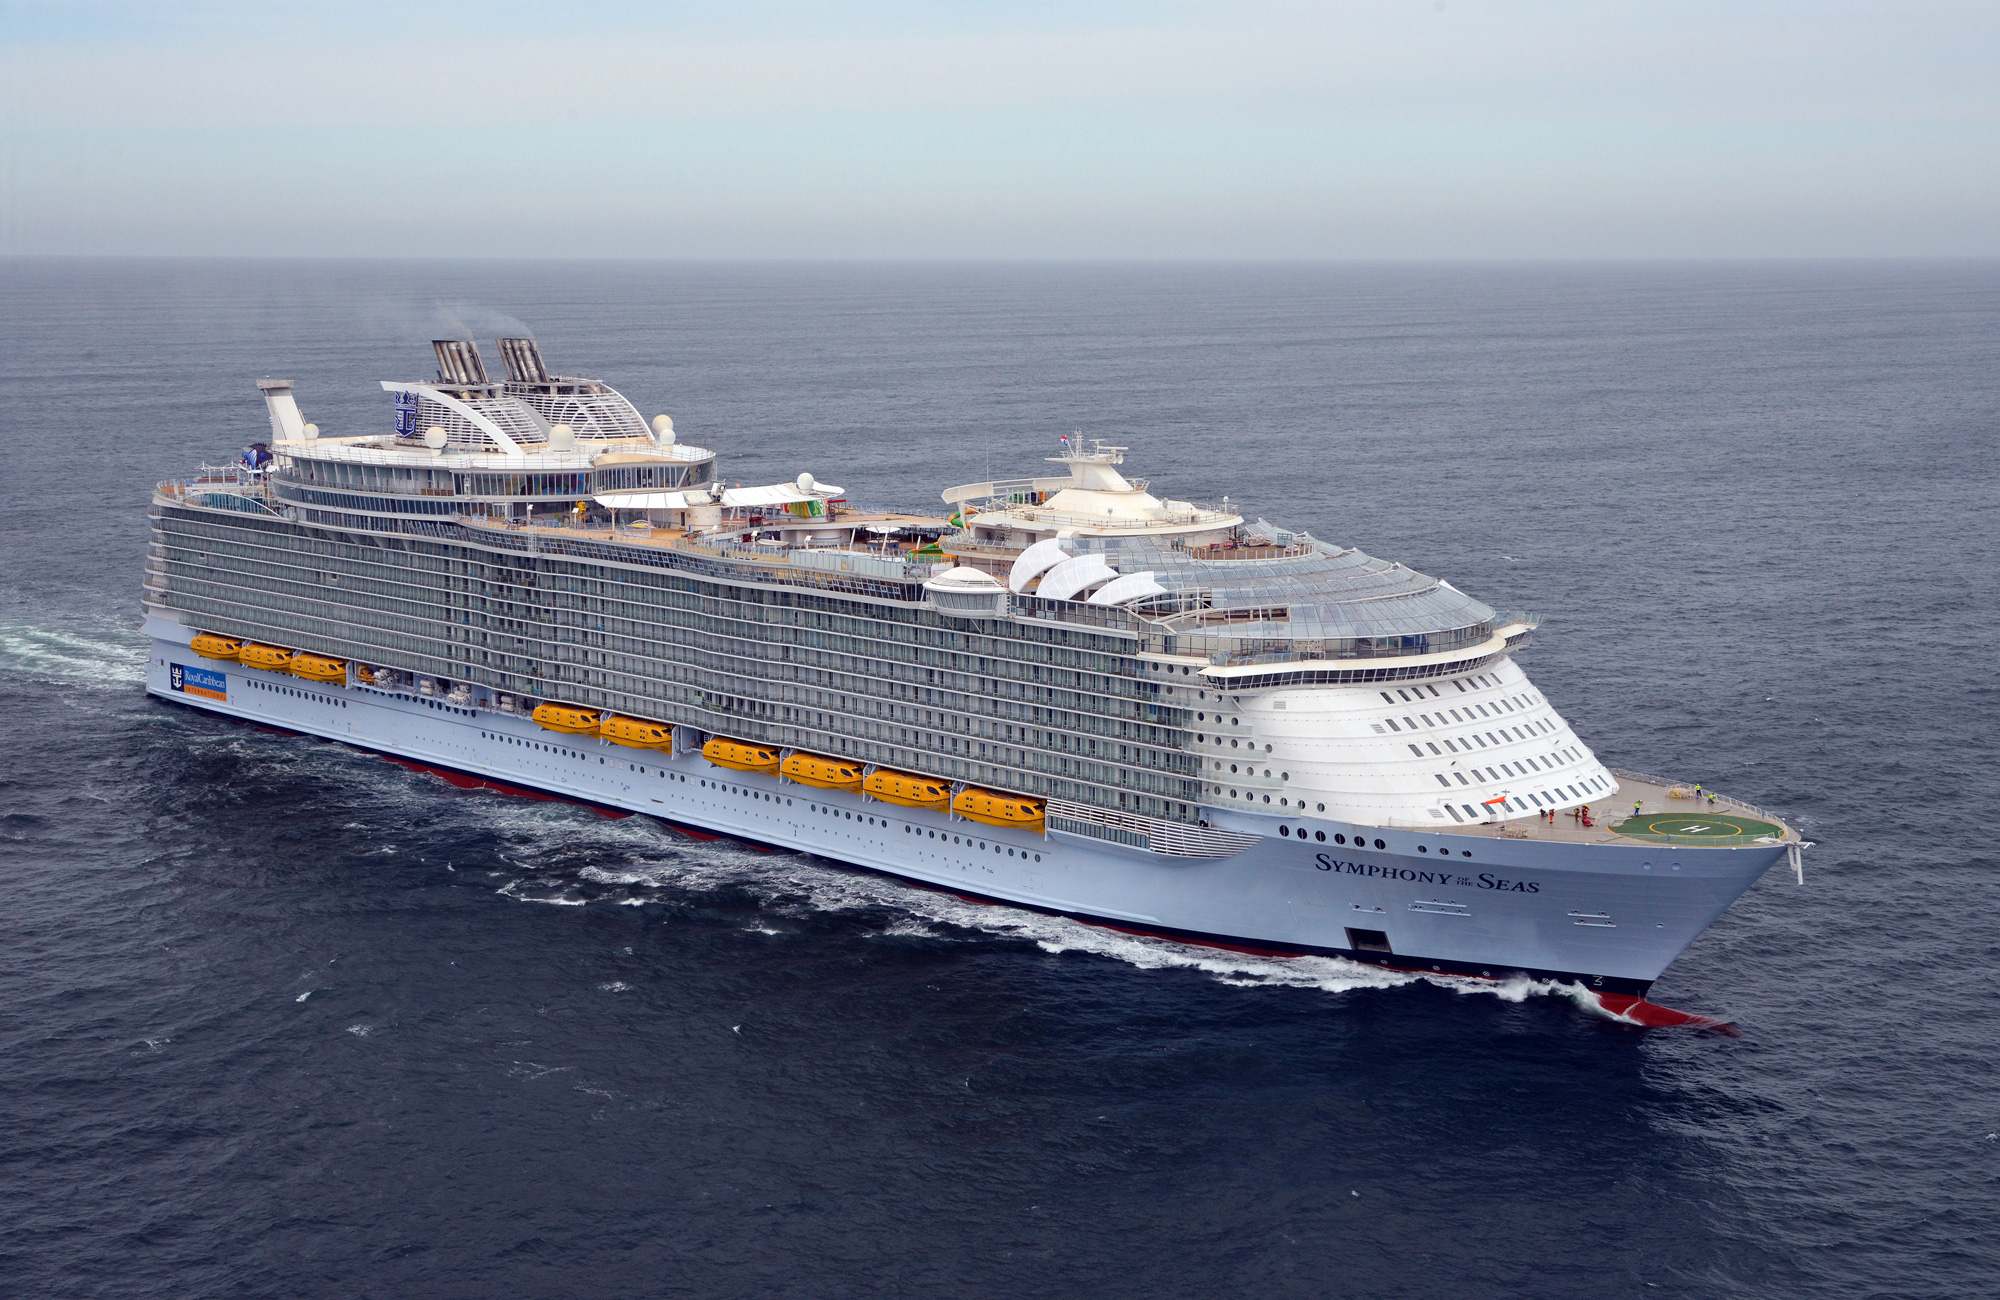 7 Things I Learned on My First Cruise Ship